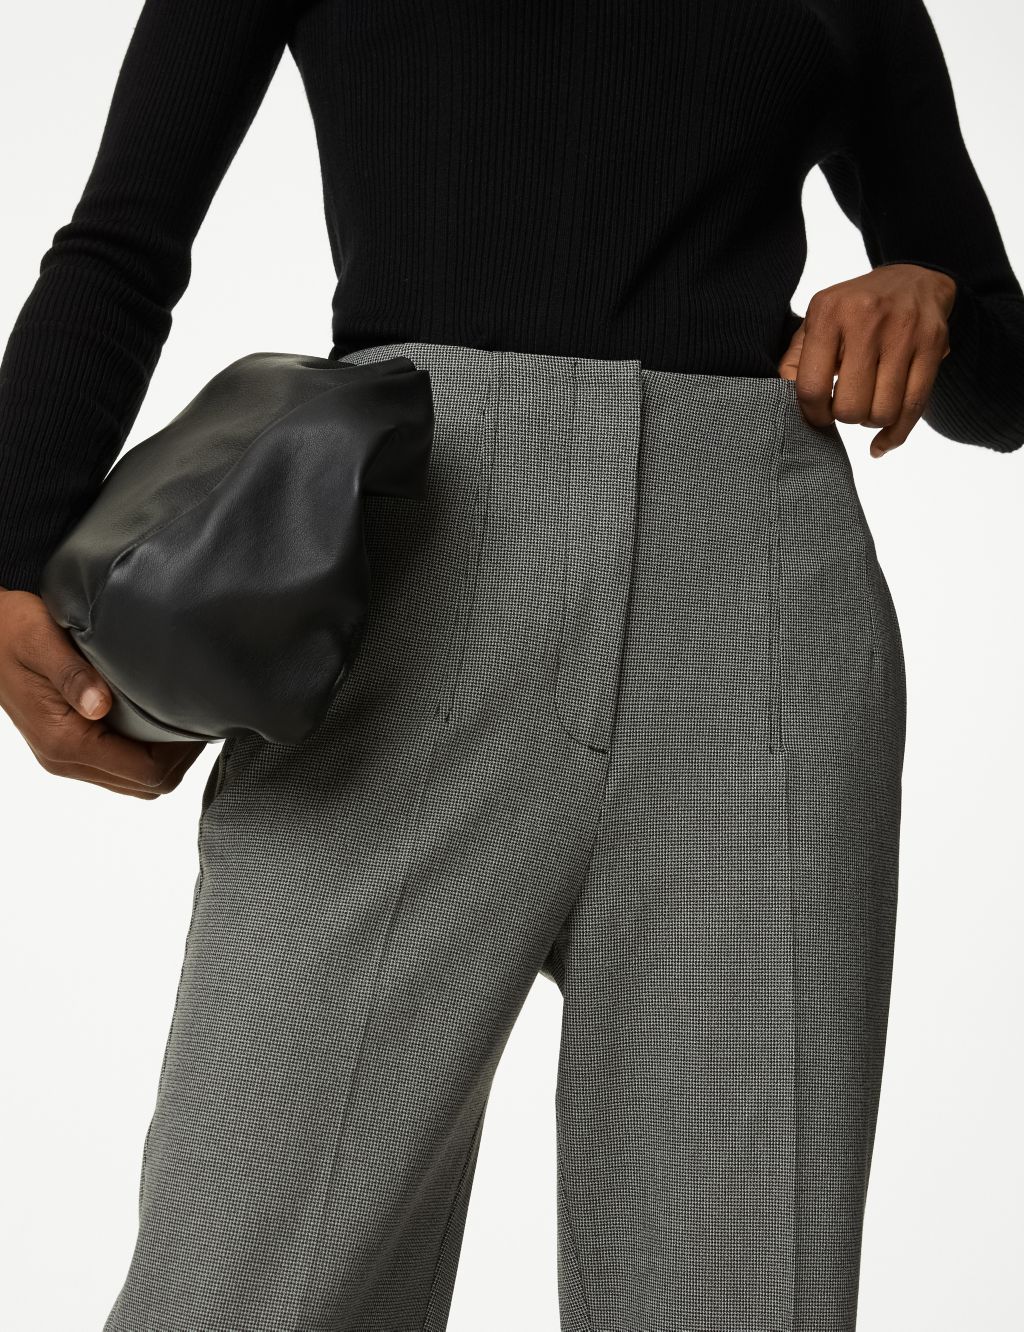 Checked Tapered Ankle Grazer Trousers image 3